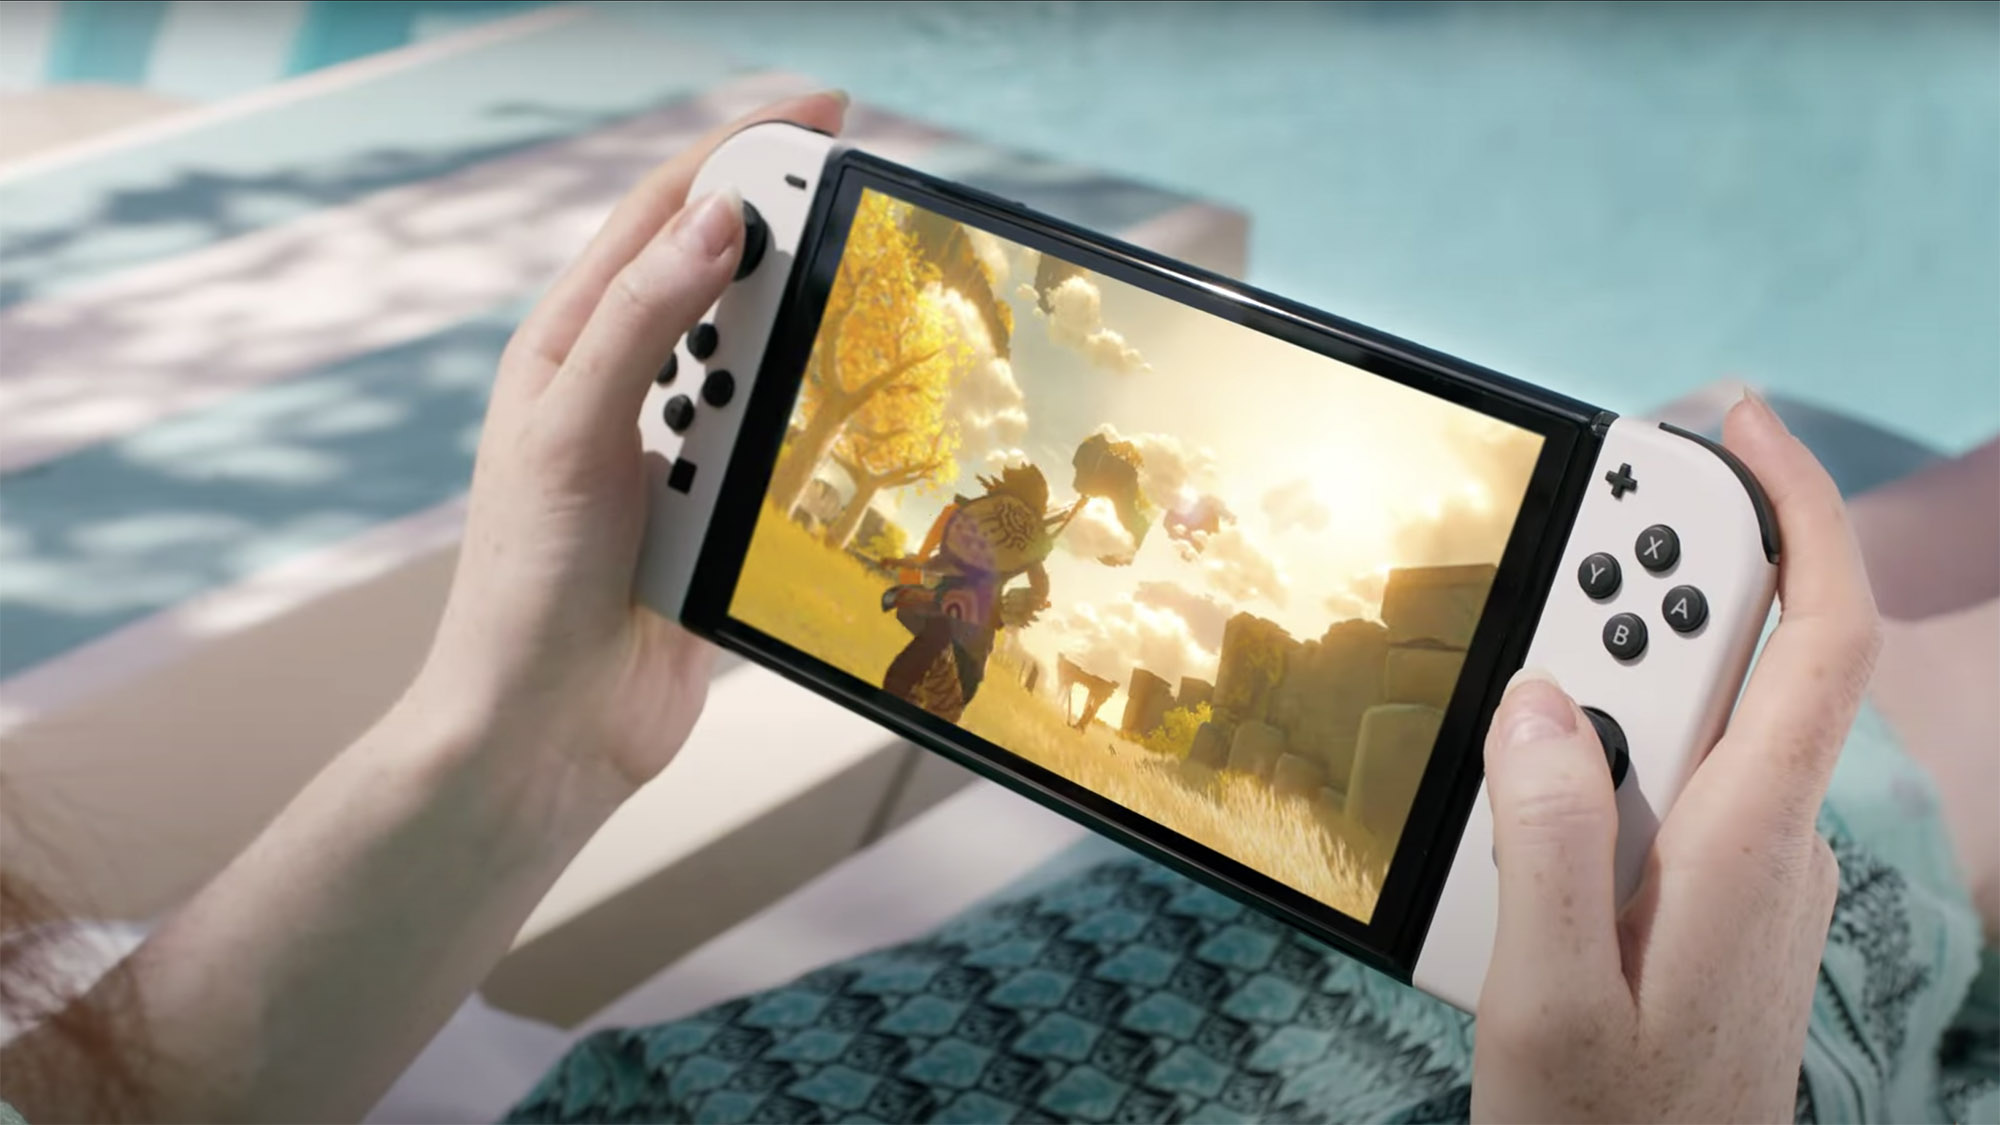 Nintendo Switch 2 And PS5 Pro Sharing Release Date! 